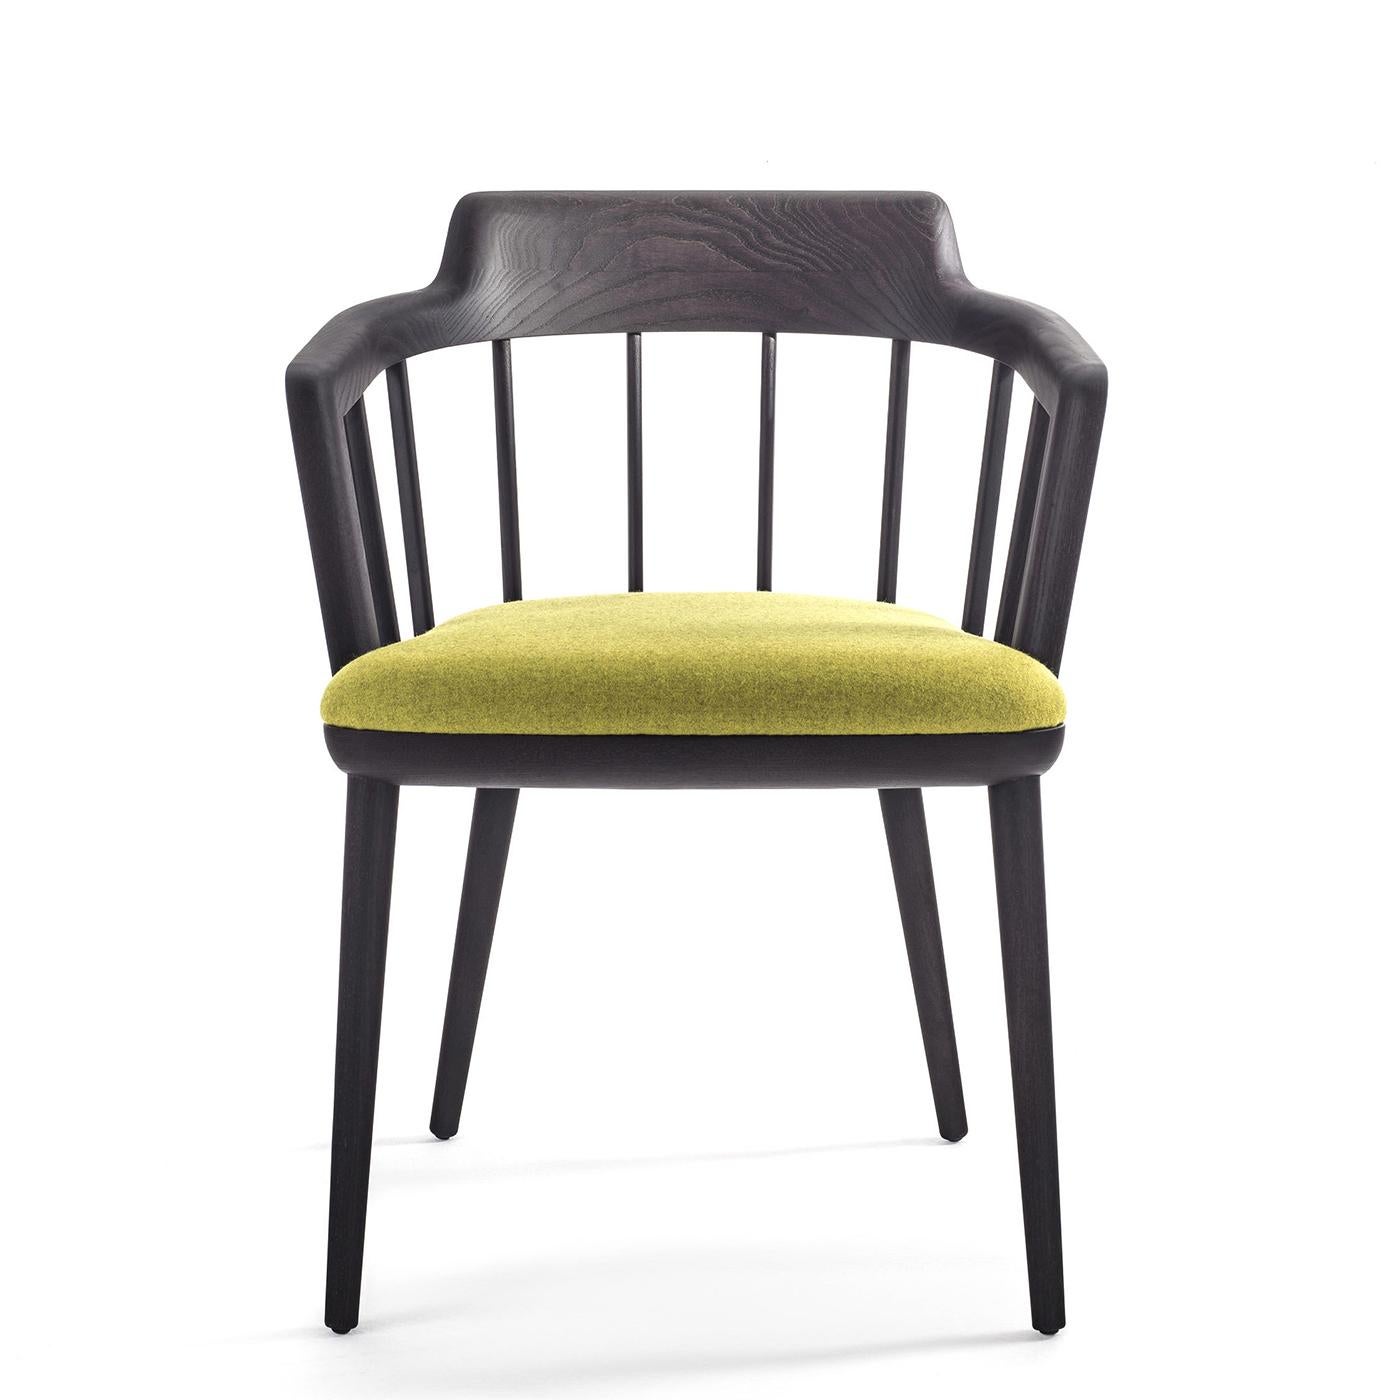 Chair Knowles ash grey with armrests with all structure in solid
ash in grey stained finish. Upholstered and covered with yellow
velvet fabric Cat C. 
Also available in other wood finishes, on request.
Also available with other fabrics, on